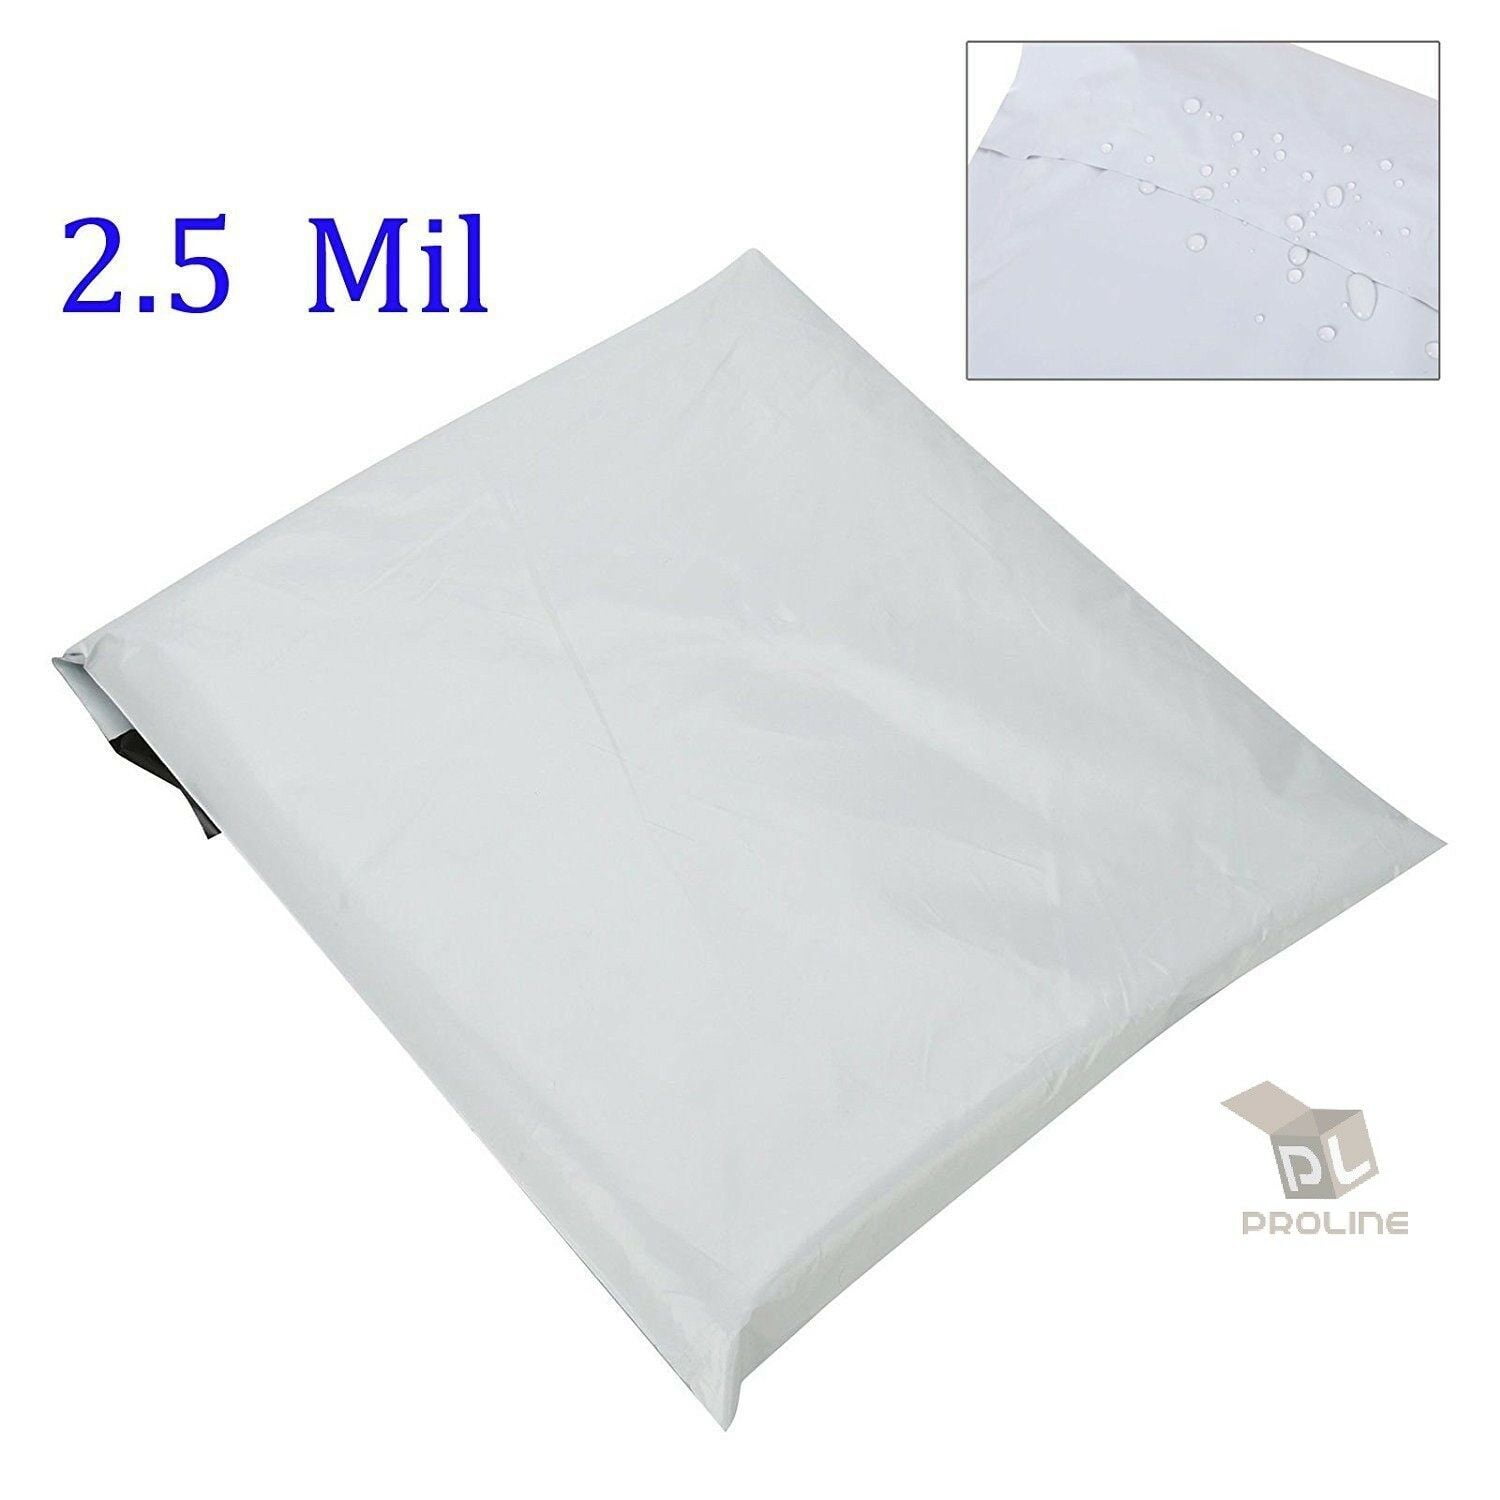 500 12x16 Poly Mailers Self Sealing Shipping Envelopes Plastic Bag 2.5 Mil 